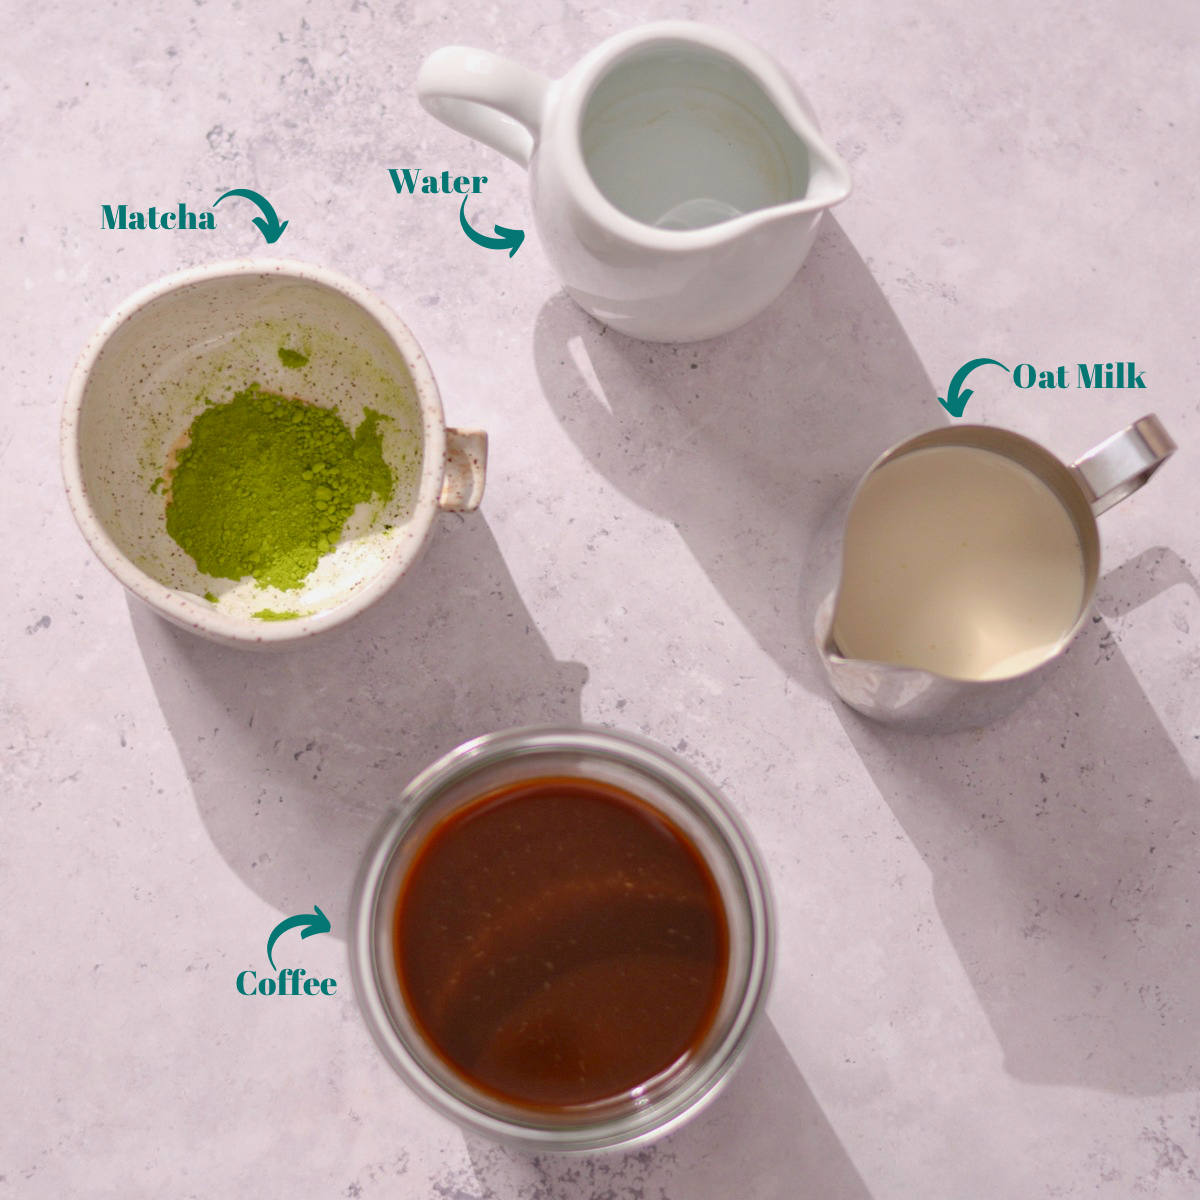 ingredients for matcha coffee latte including matcha, water, coffee, and milk.